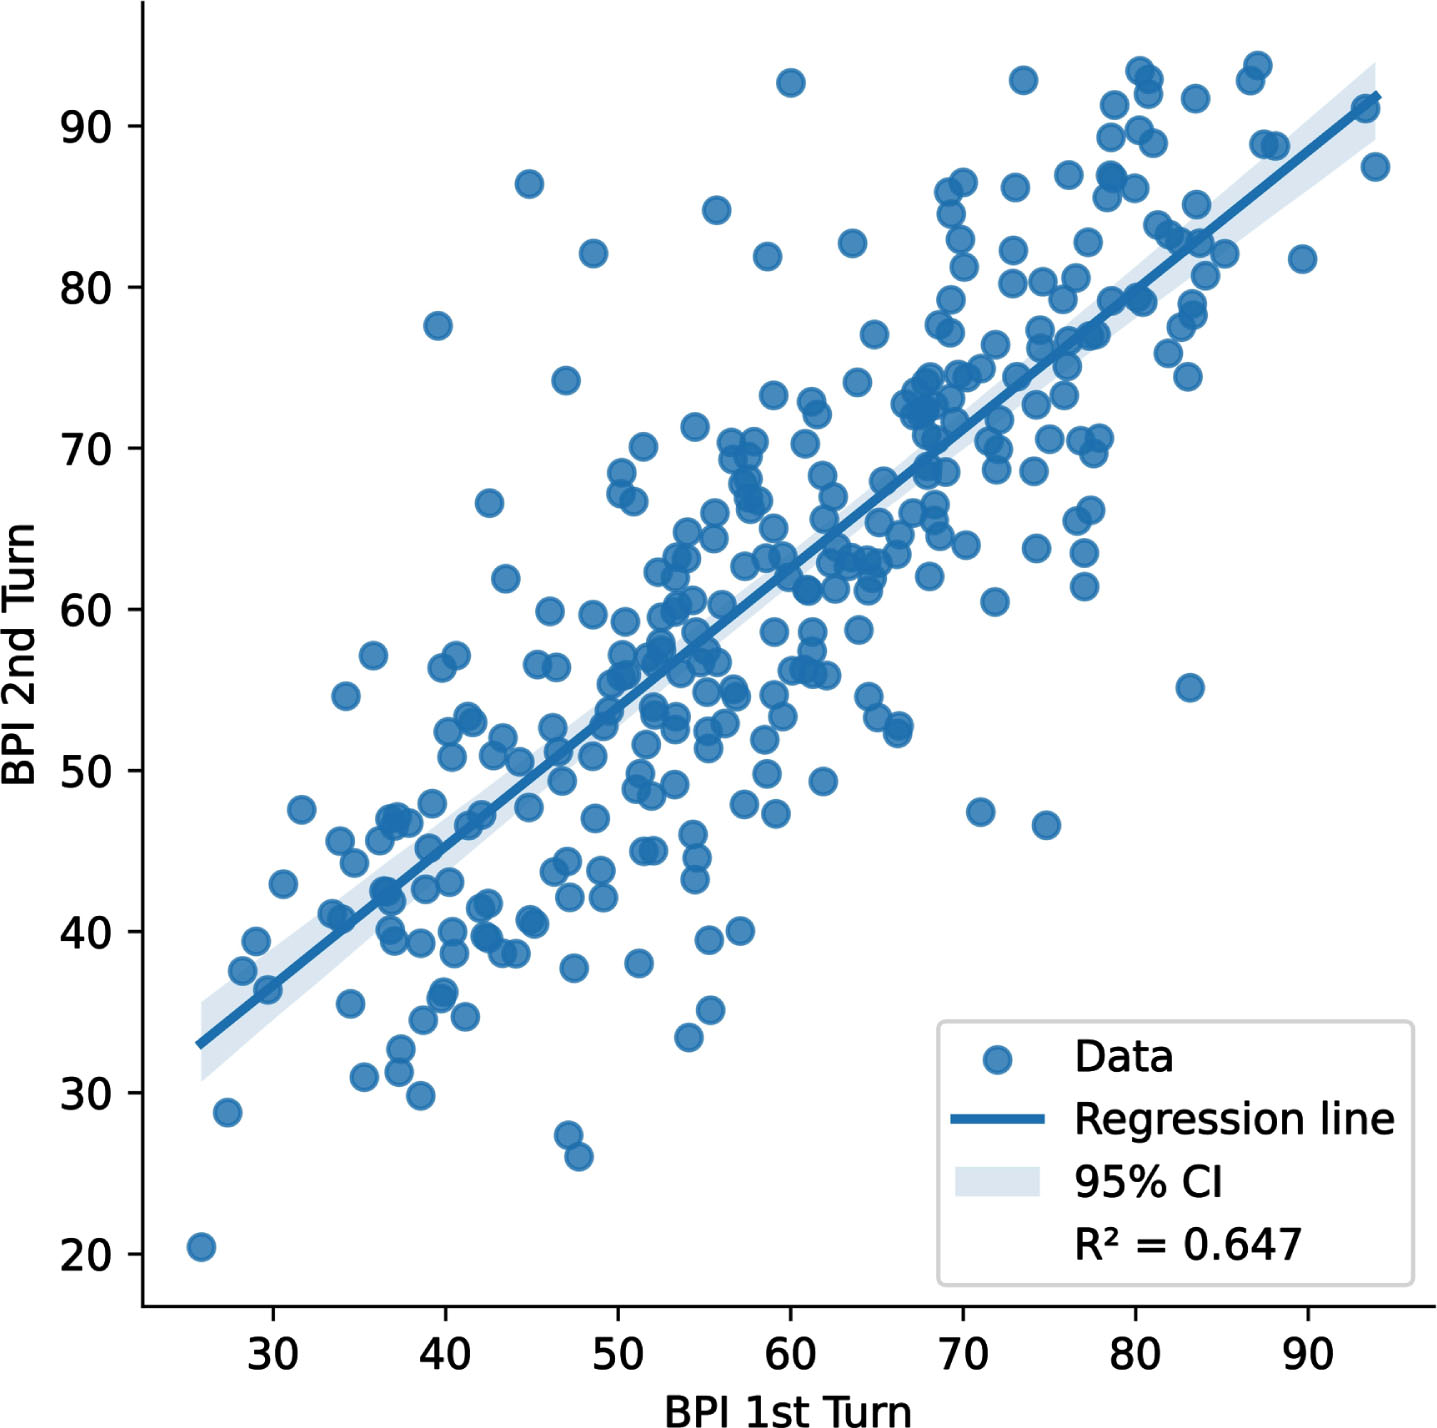 Scatterplot of the comparison between first and second attempts of subjects at Beynex test. The added regression line has a slope of 0.86 with a 95% confidence interval (0.791, 0.935) which is shown as the shaded blue are about the line. The y-intercept is 10. R∧2 was found to be 0.647.